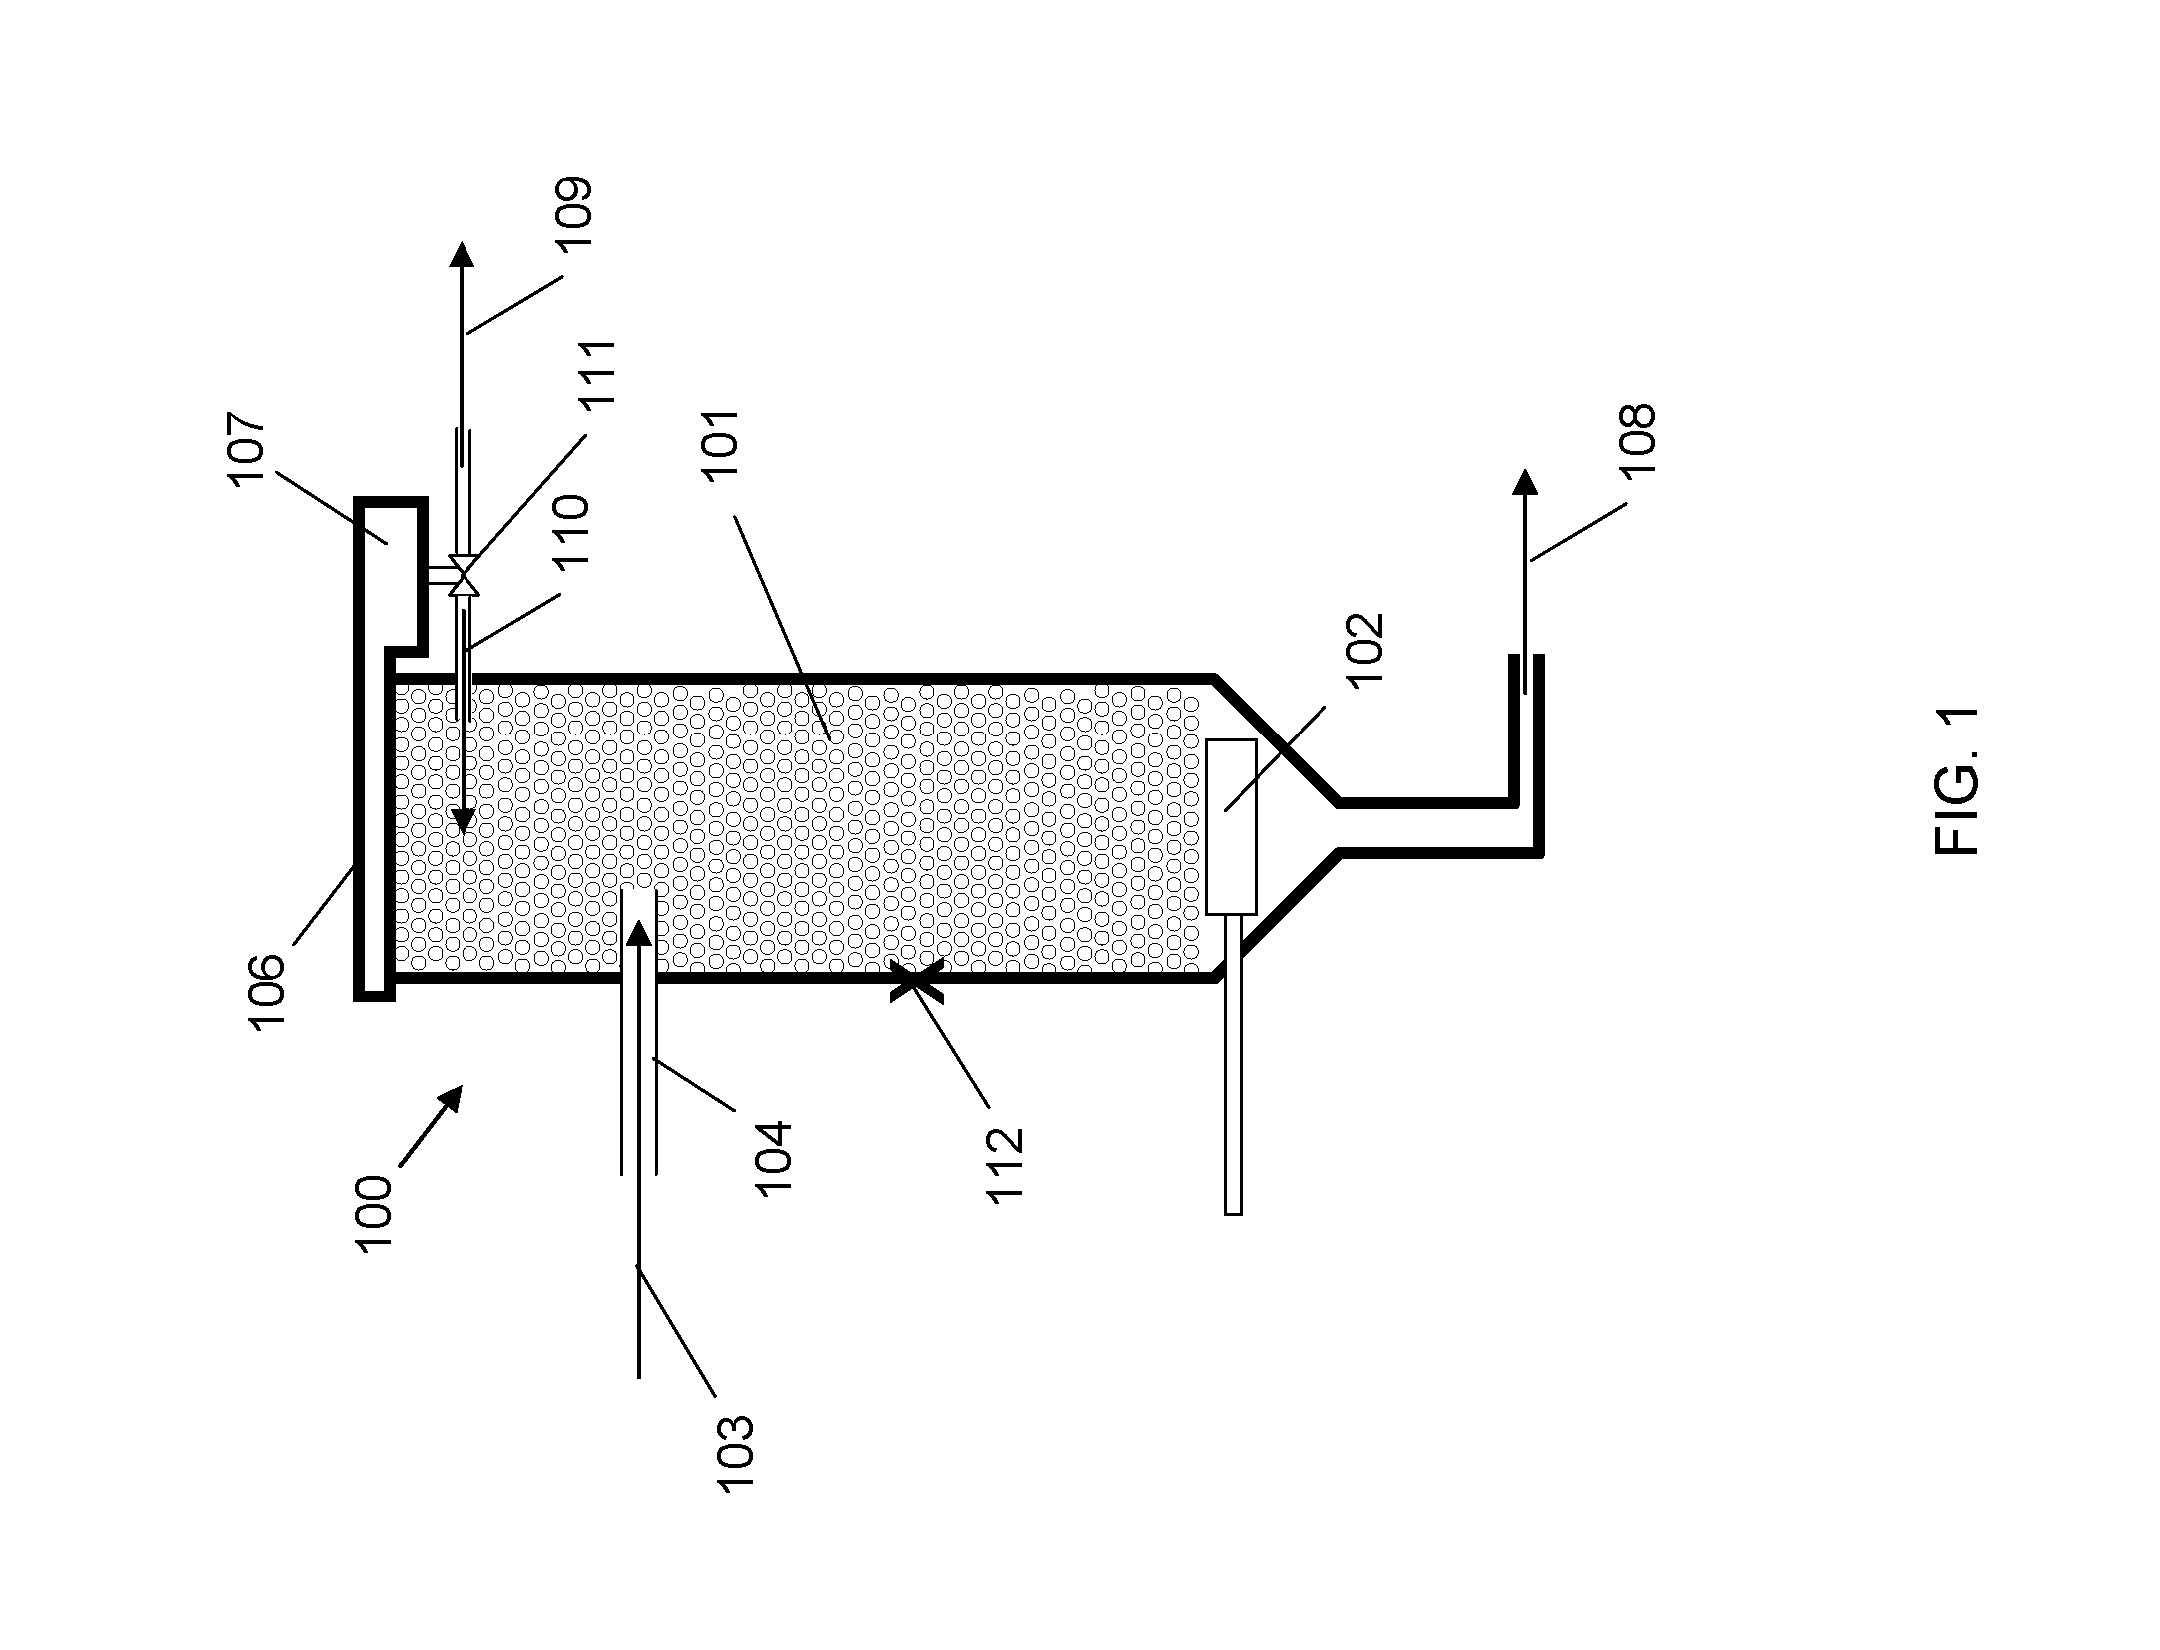 Method for enhancing selectivity and recovery in the fractional flotation of particles in a flotation column